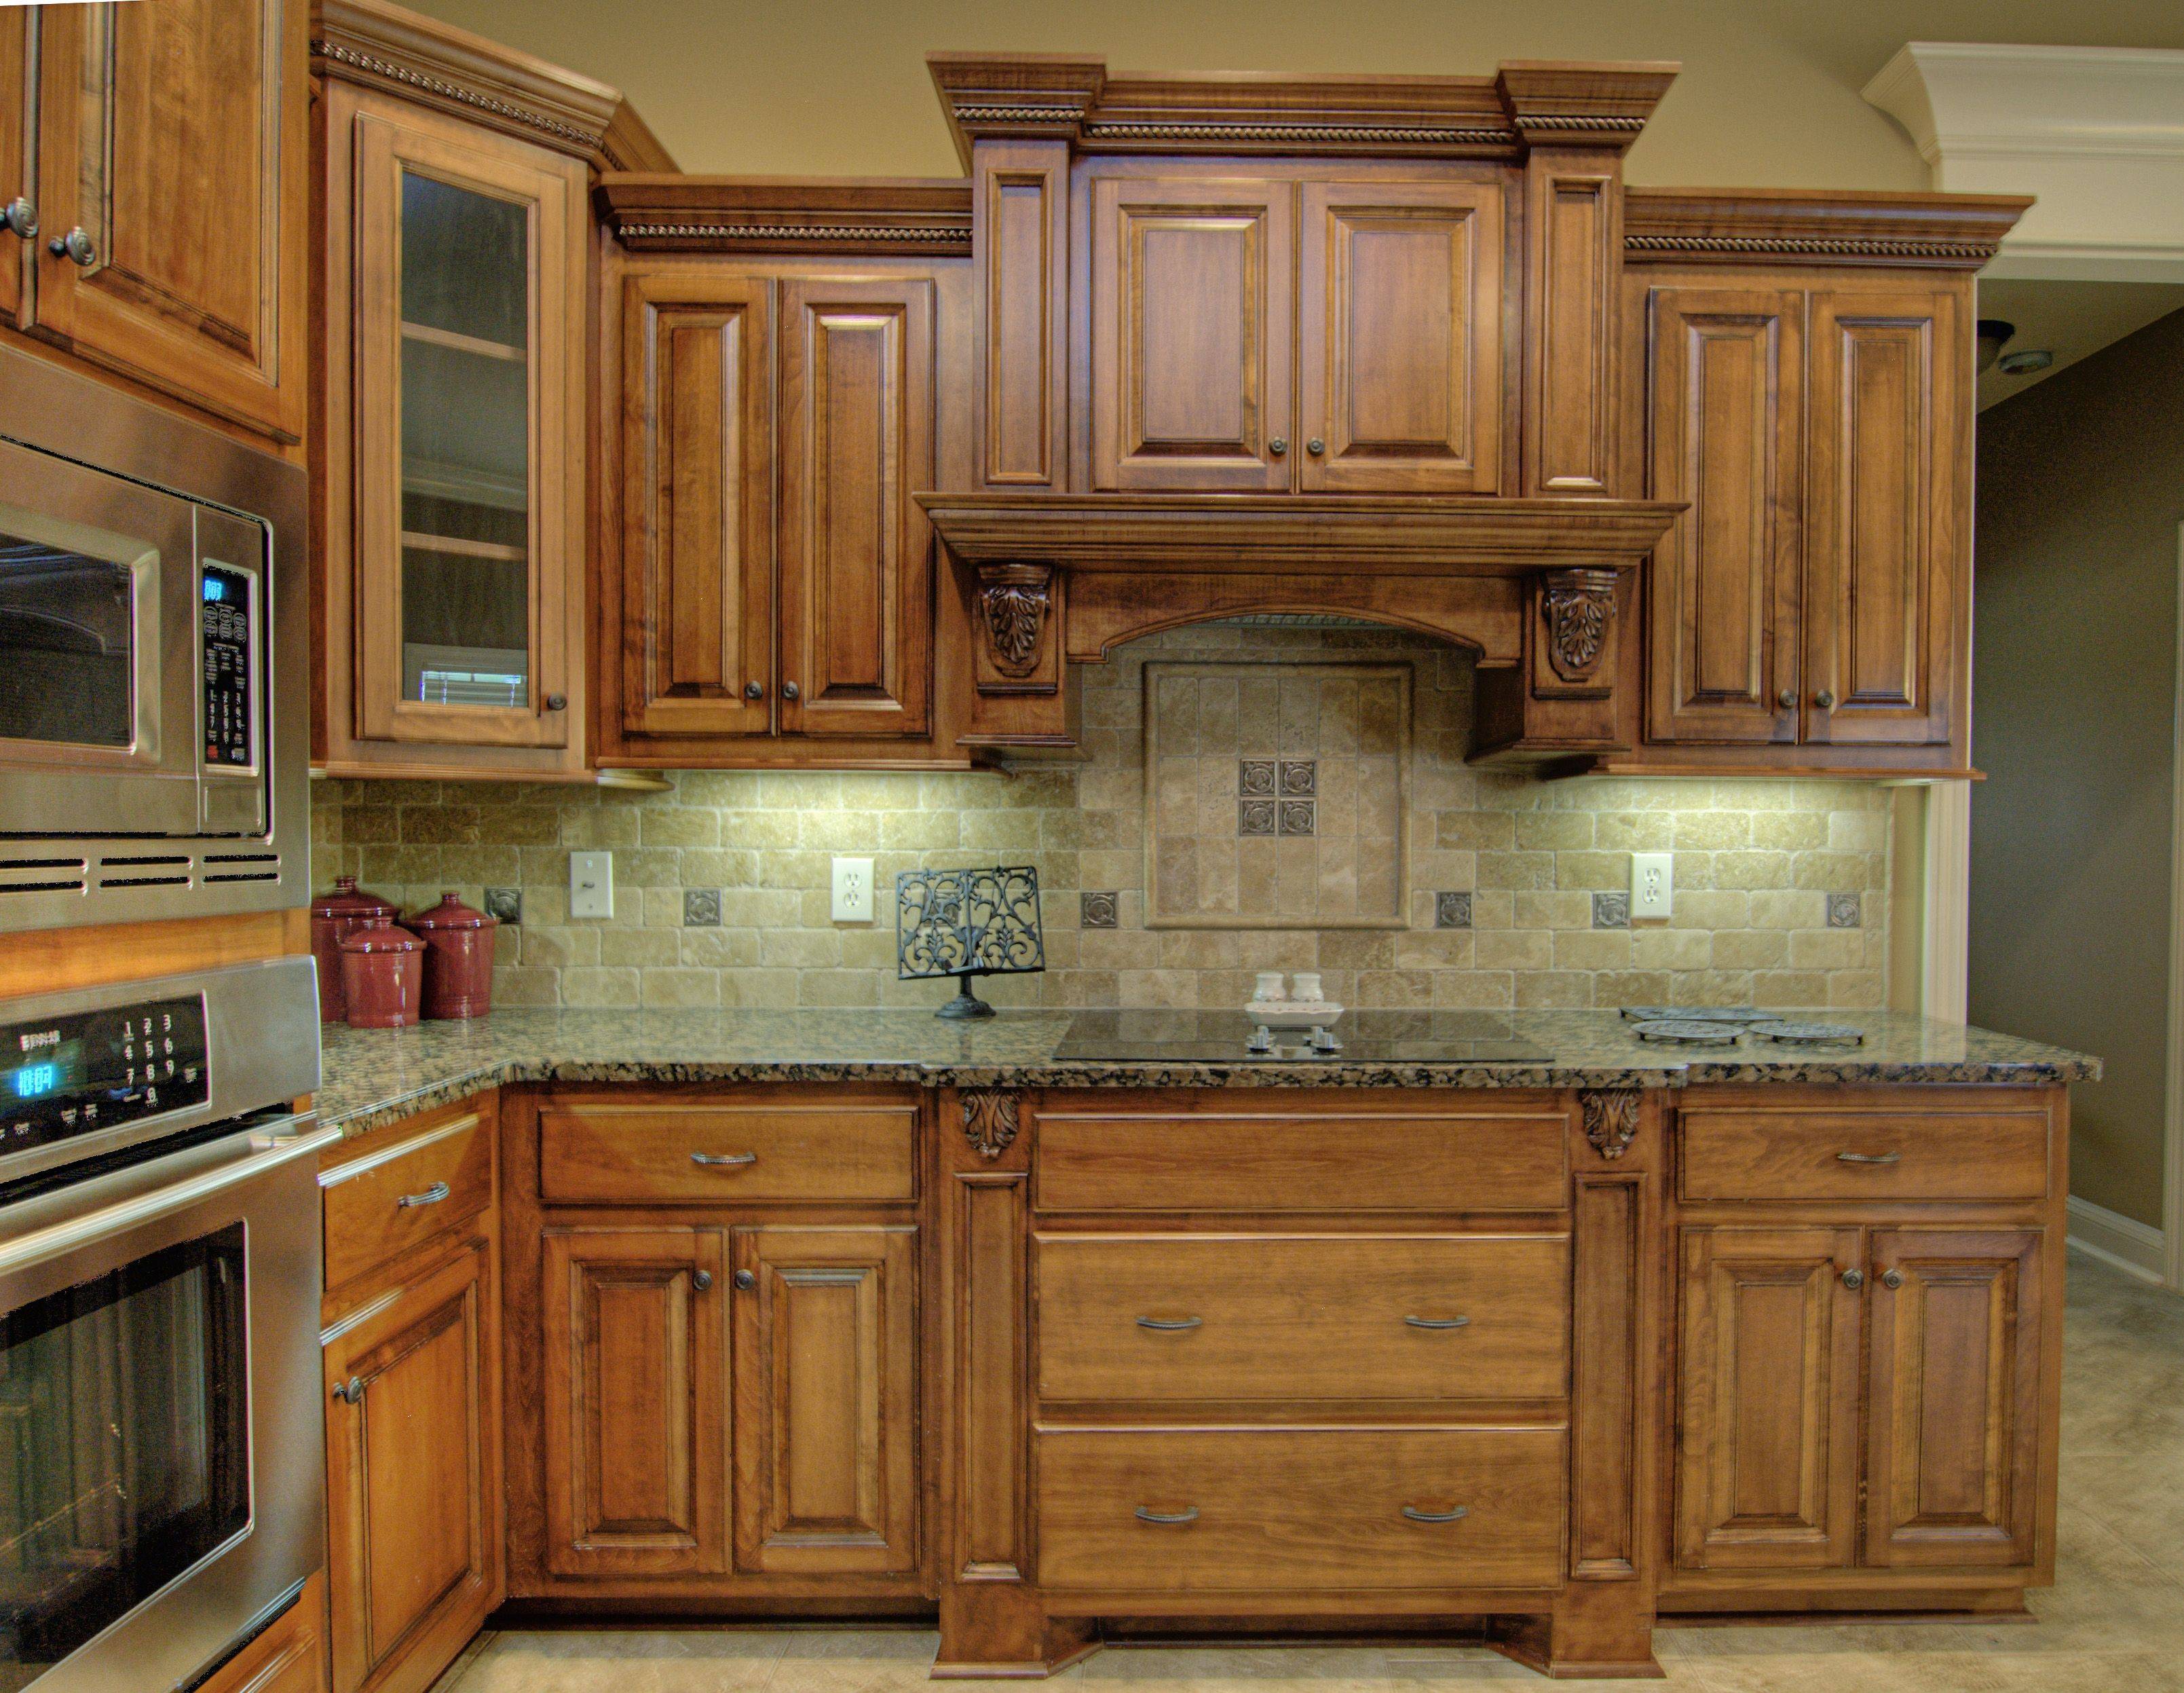 Knotty Pine Cabinets | Home Design